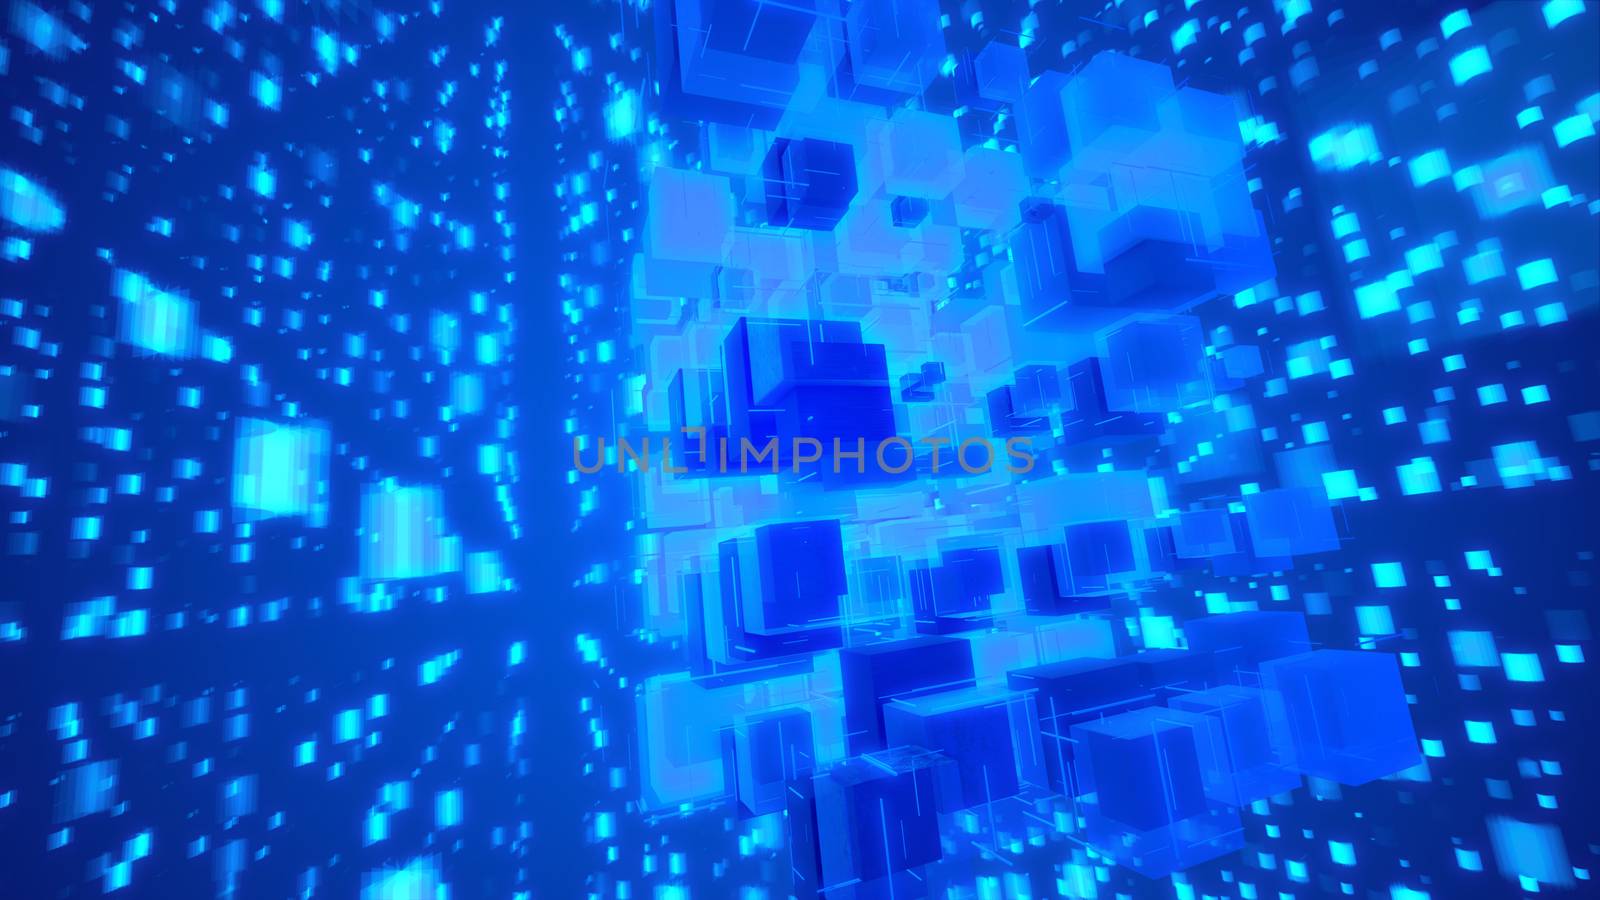 Hi-tech 3d illustration of glittering light blue cubes fixed together as a macrostructure in the blue background. The shining squares fly hign and create the mood of fest and celebration.